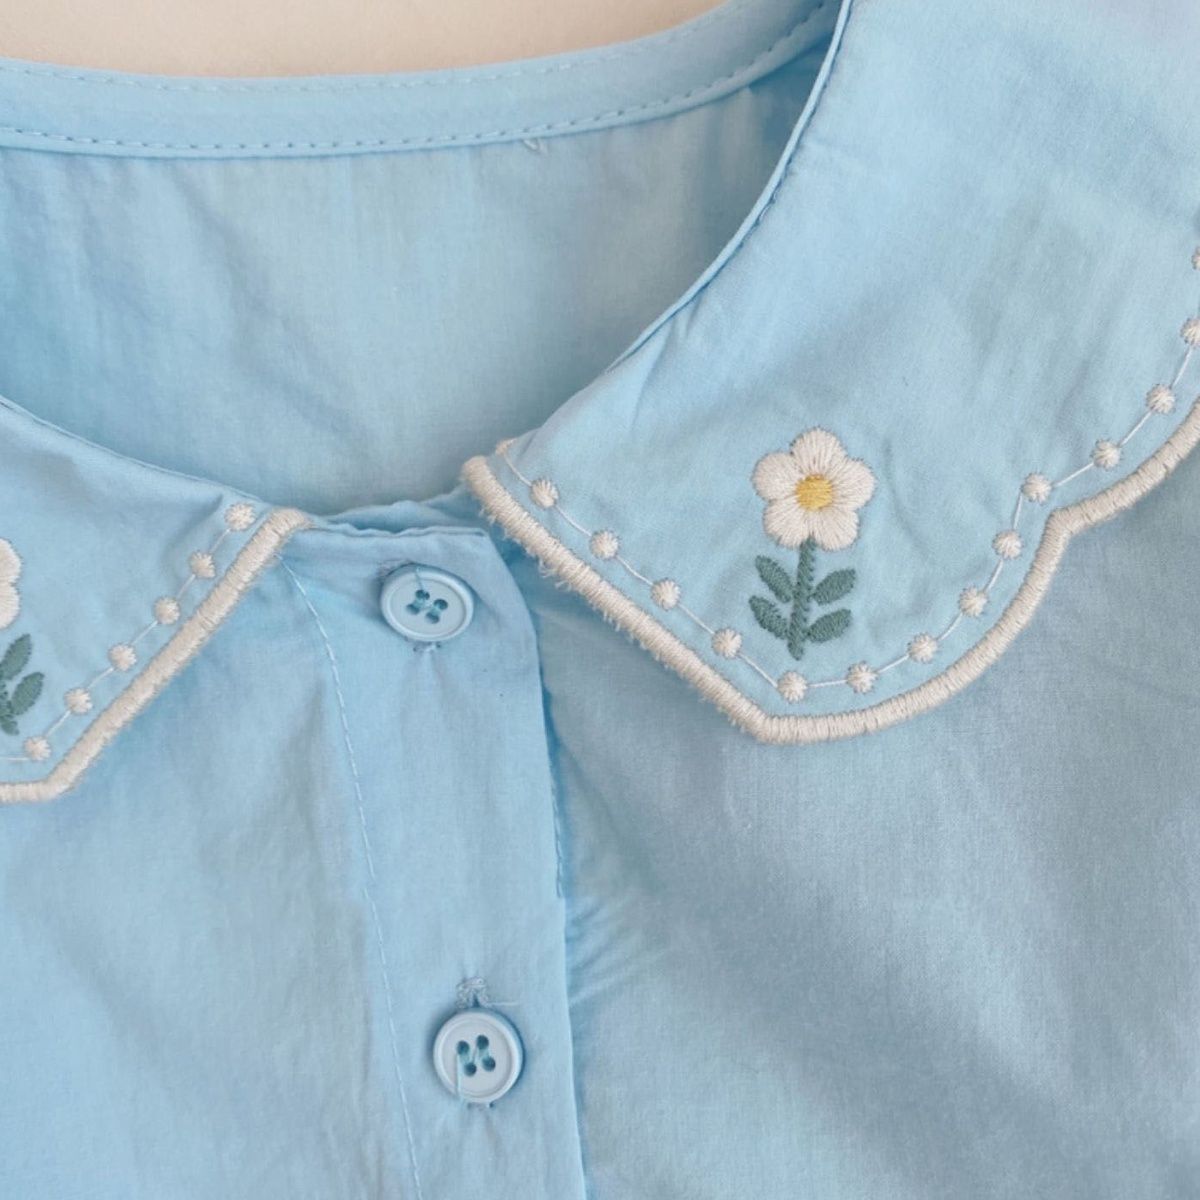 Sweet embroidery Korean children's clothing girls summer clothing baby cotton short-sleeved shirt children's doll shirt top two-piece set